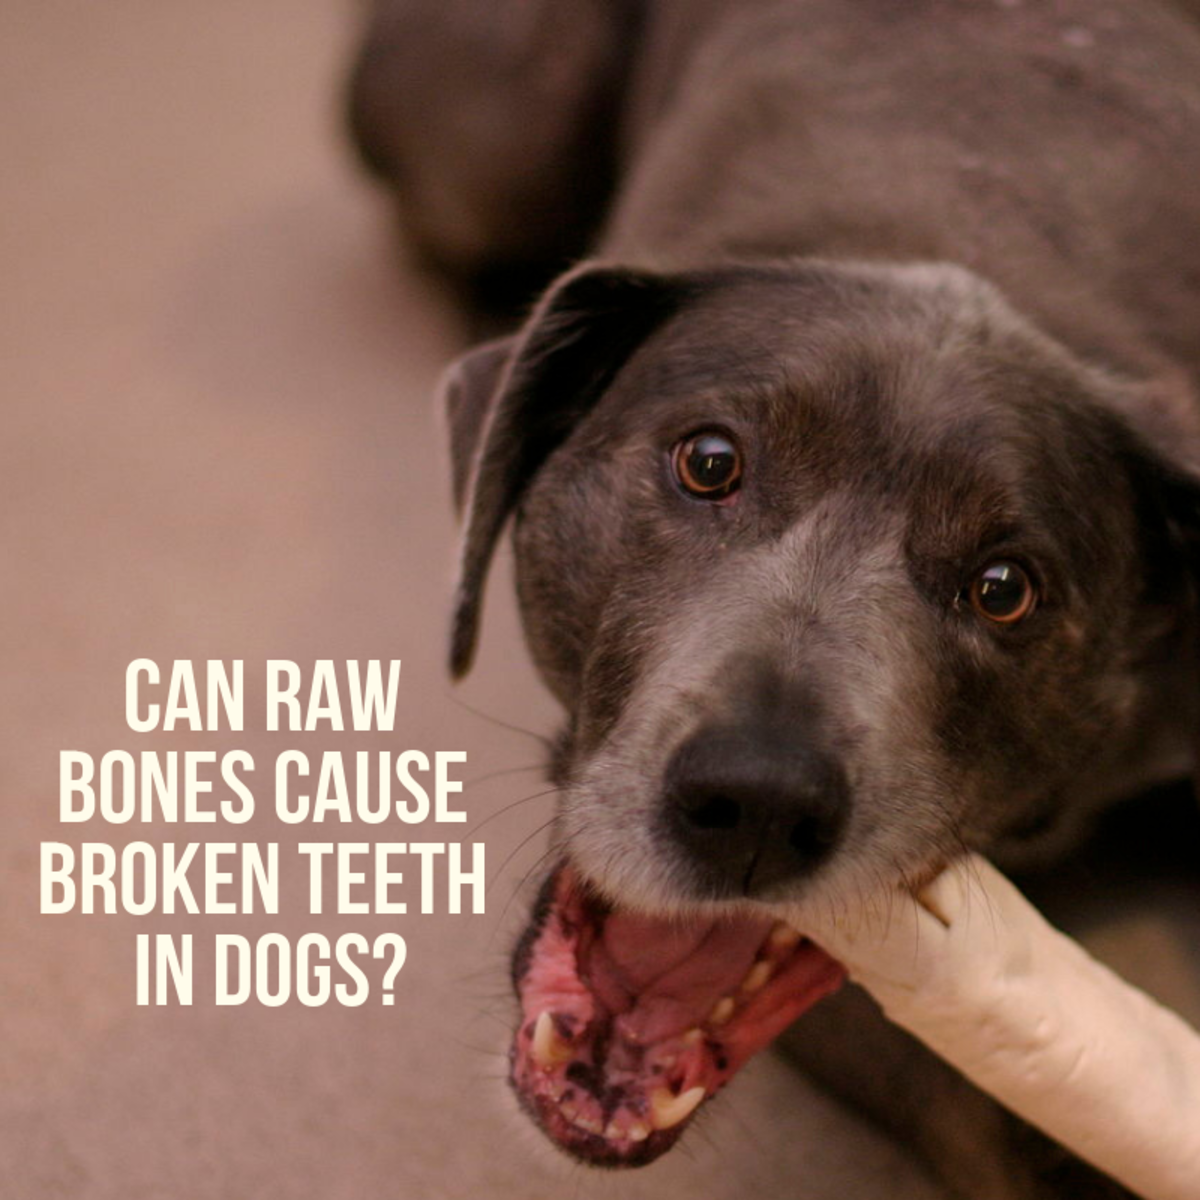 Raw bones, antlers, and hooves are commonly used as dog chews, but it might be time to rethink this dangerous practice.